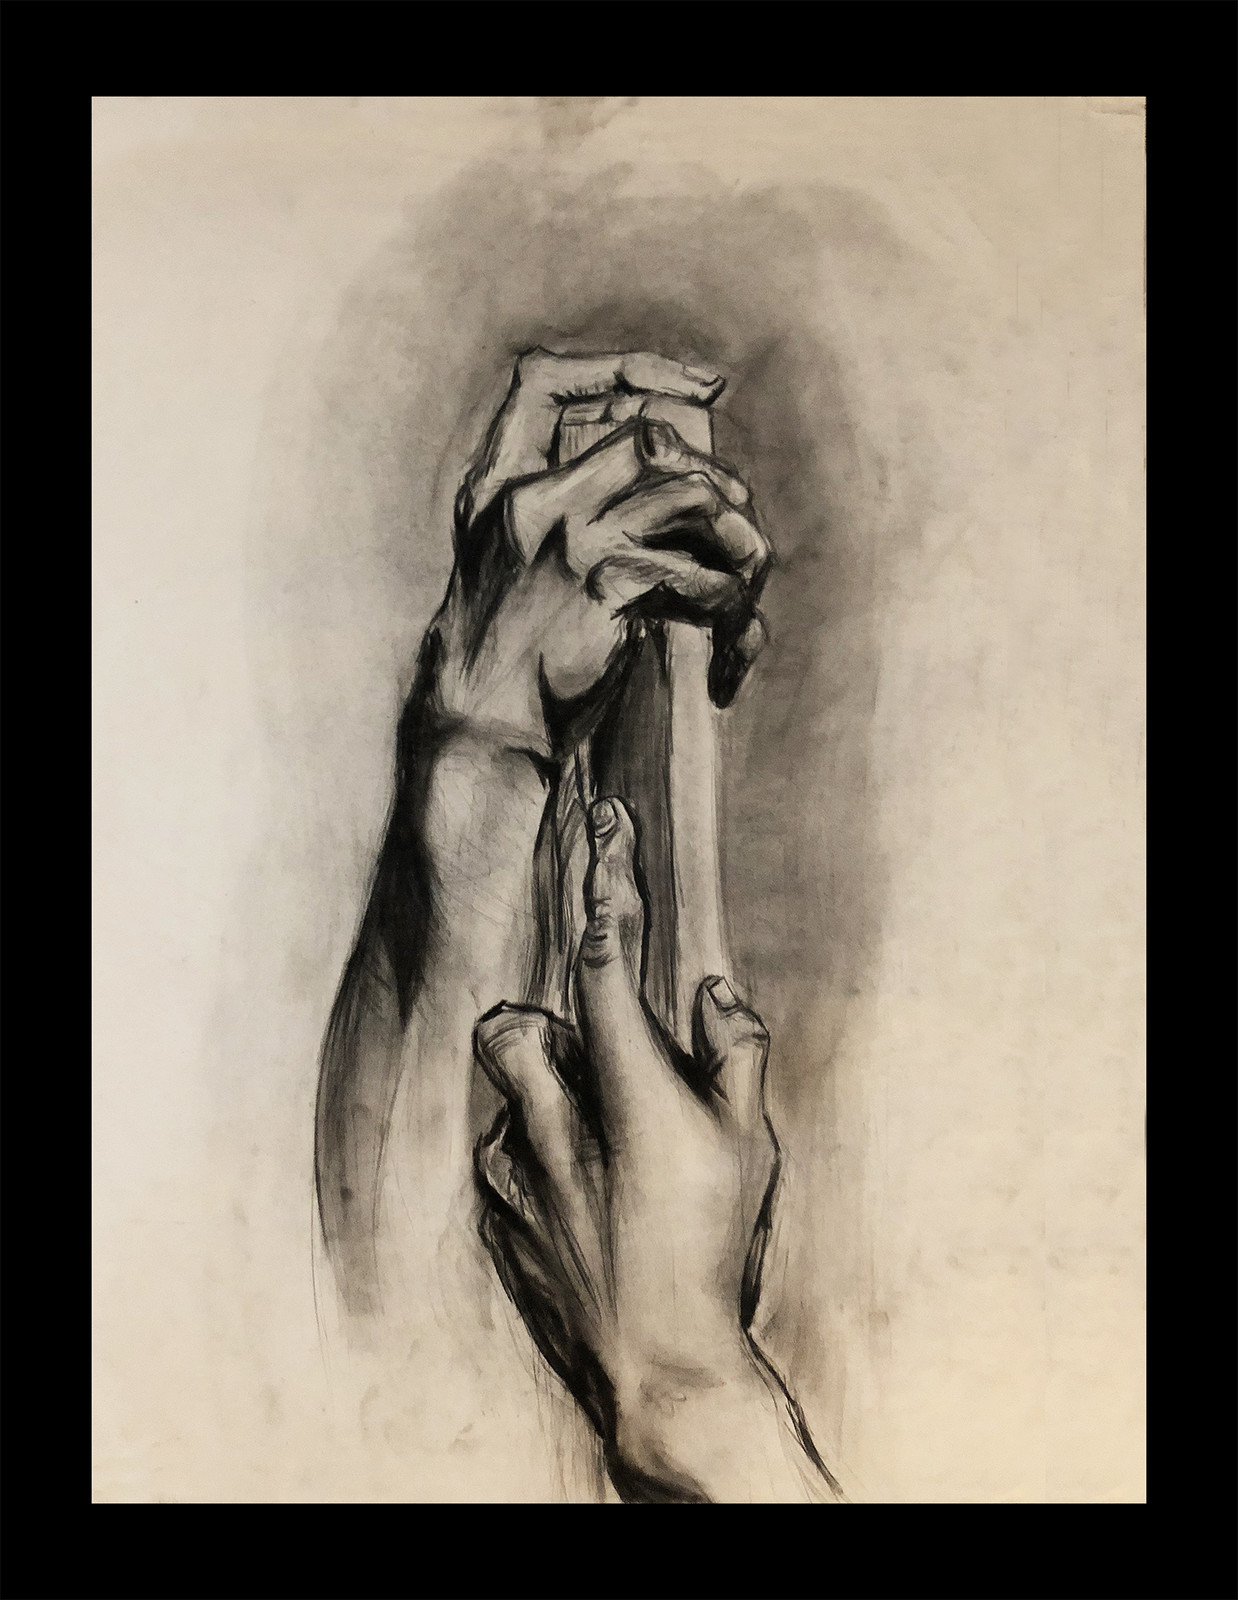 Charcoal on paper 60.96 cm × 76.2 cm